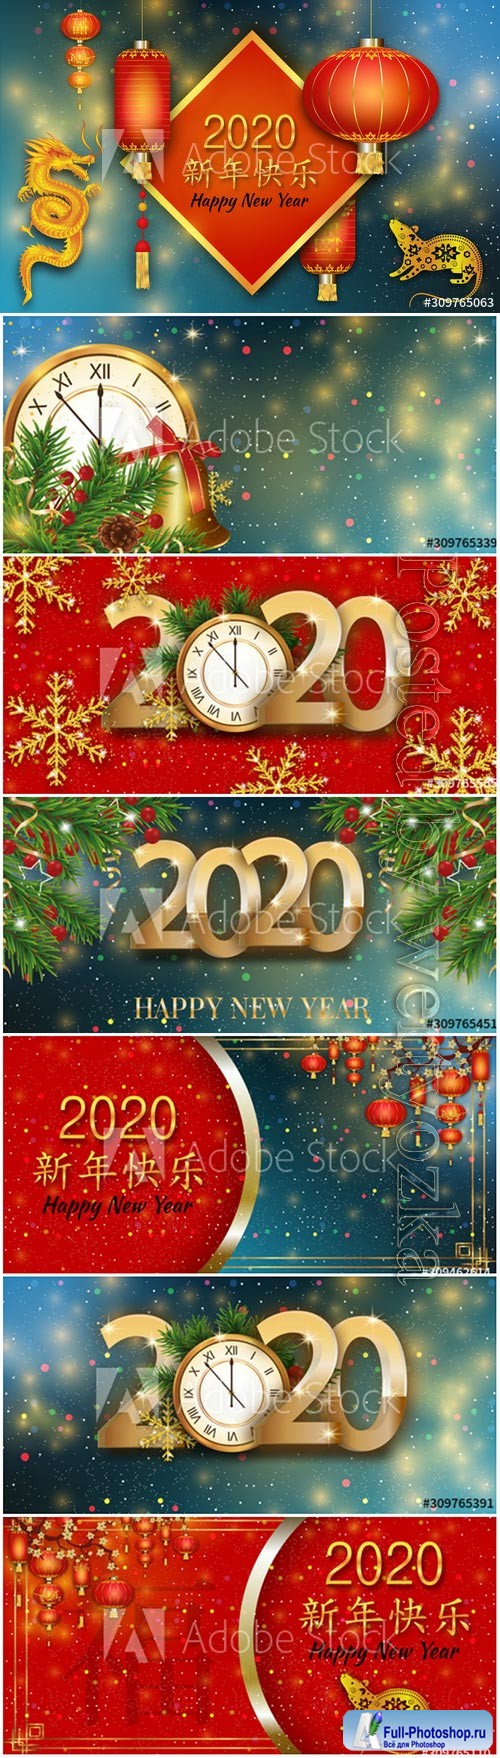 Happy New Year 2020 vector background